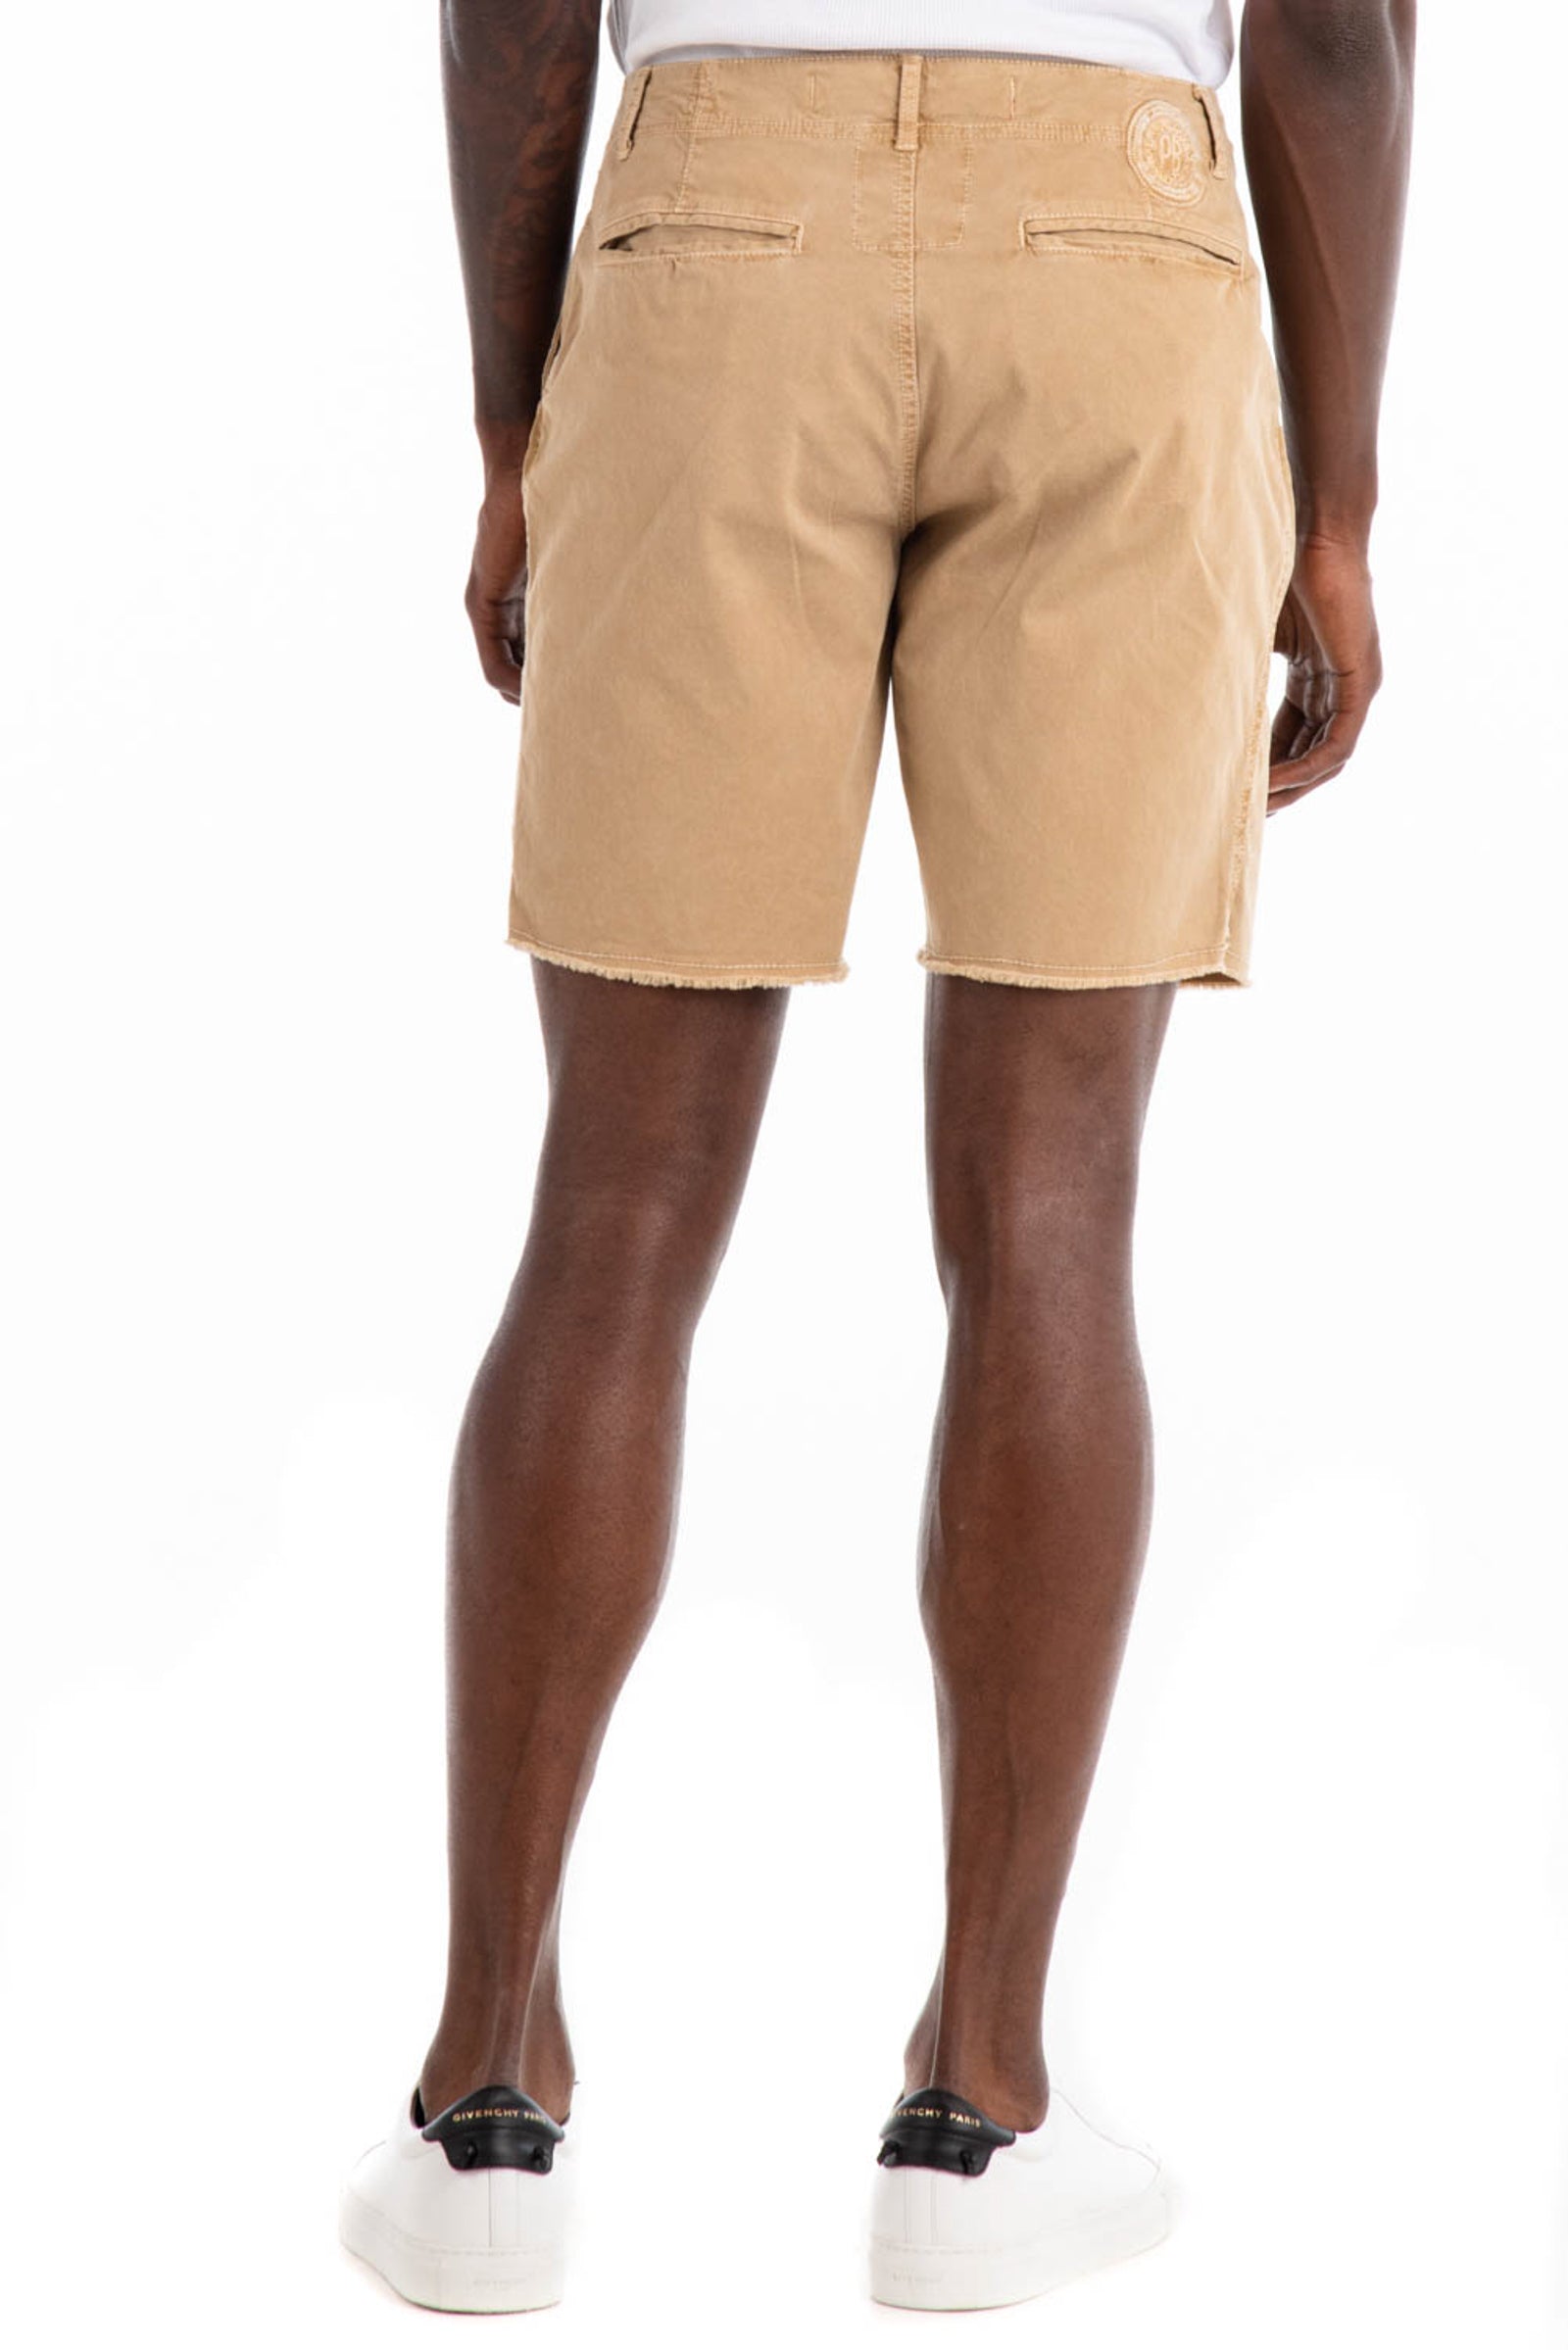 Original Paperbacks Brentwood Chino Short in Khaki on Model Cropped Back View